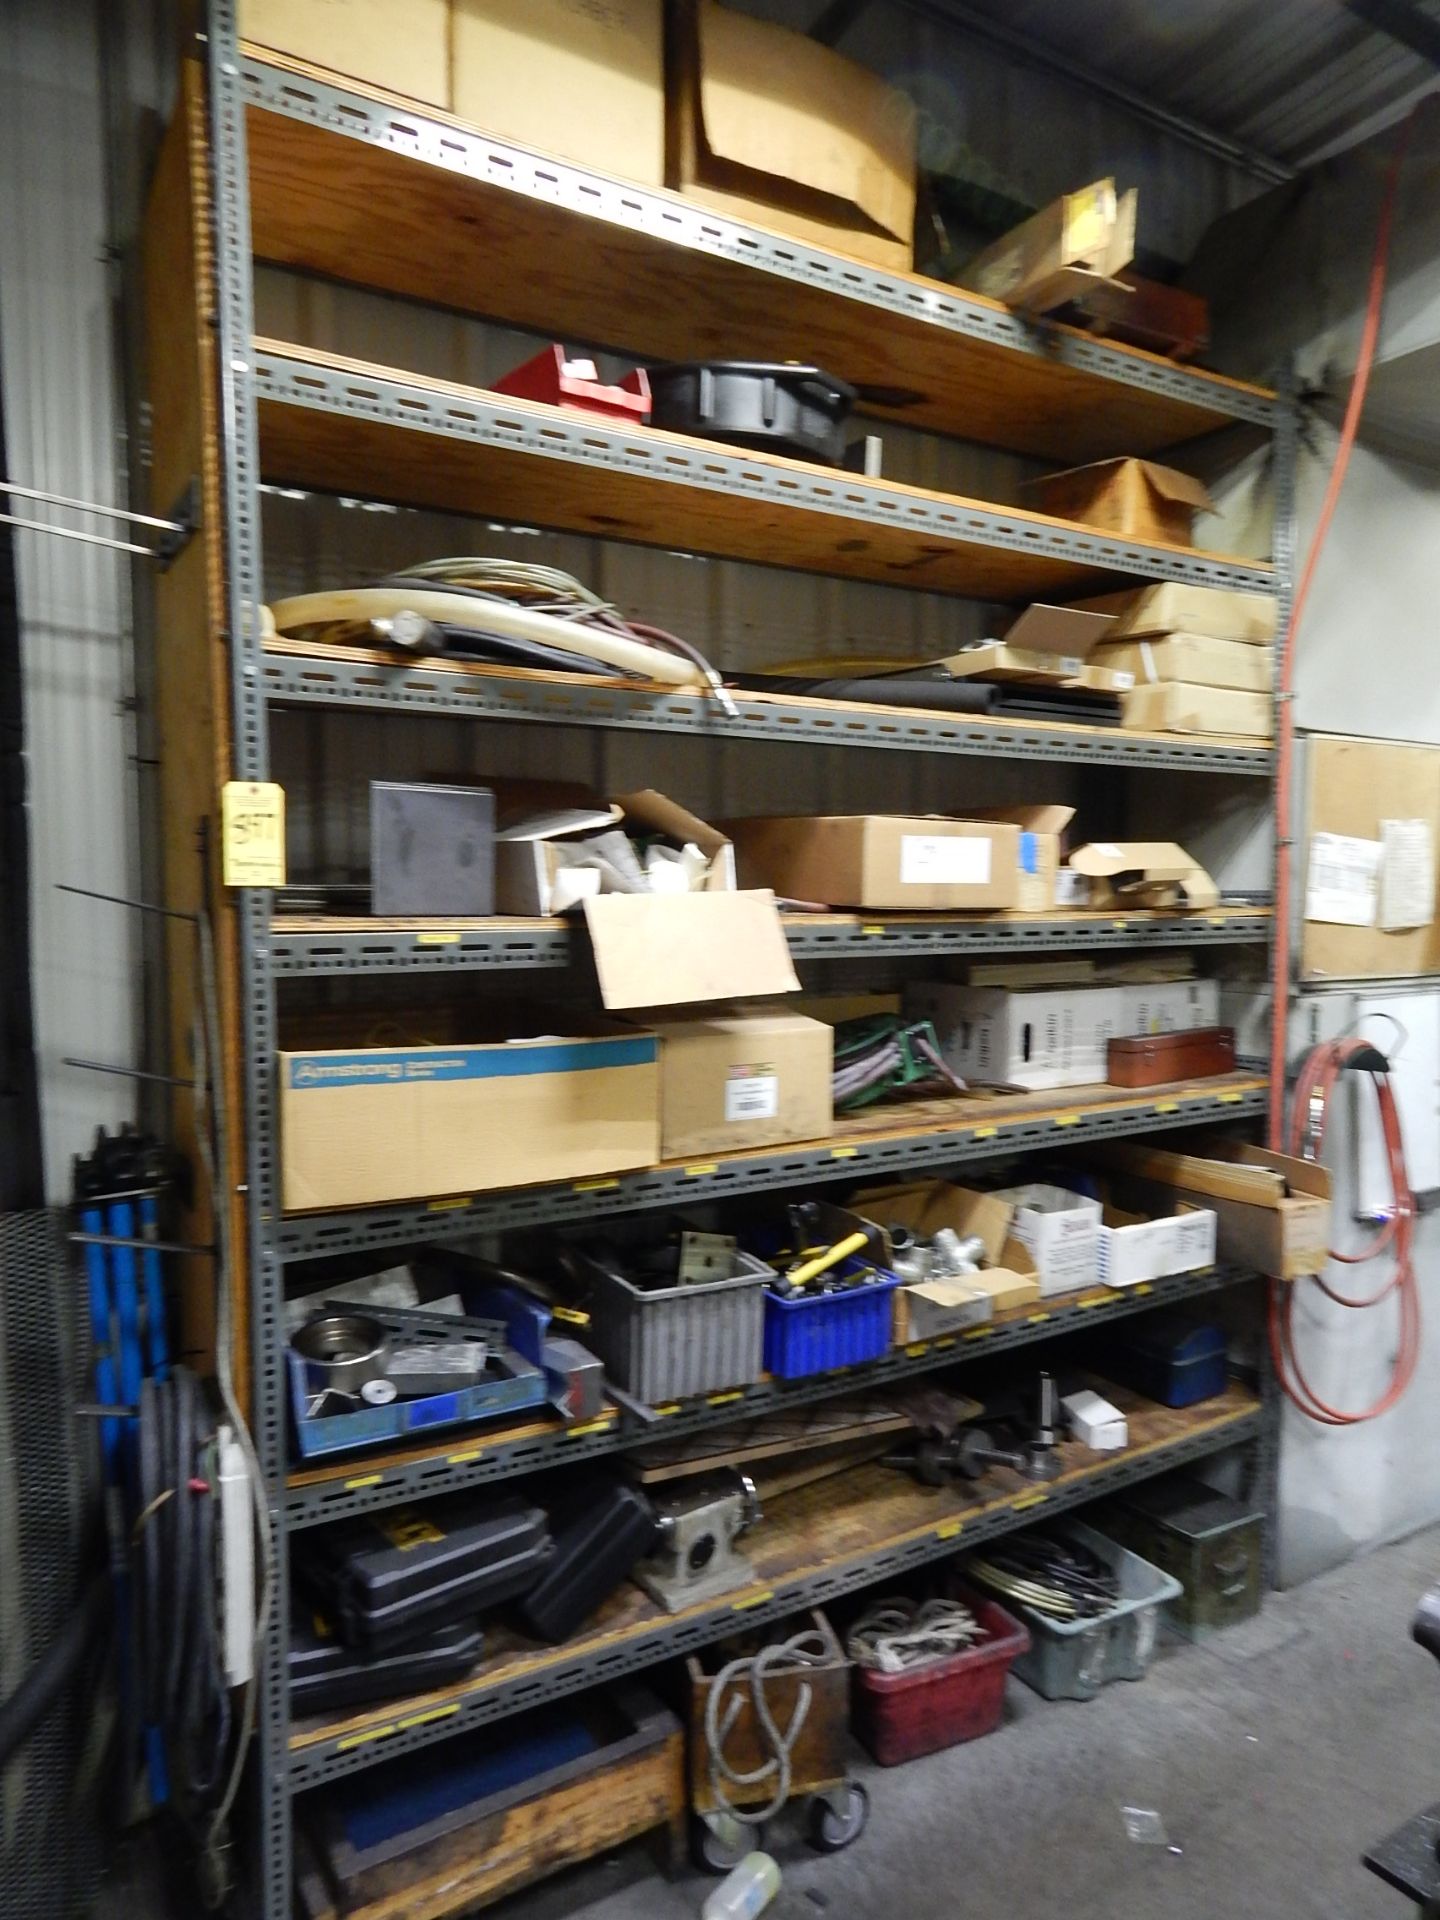 Metal Shelving and Contents of MRO Items